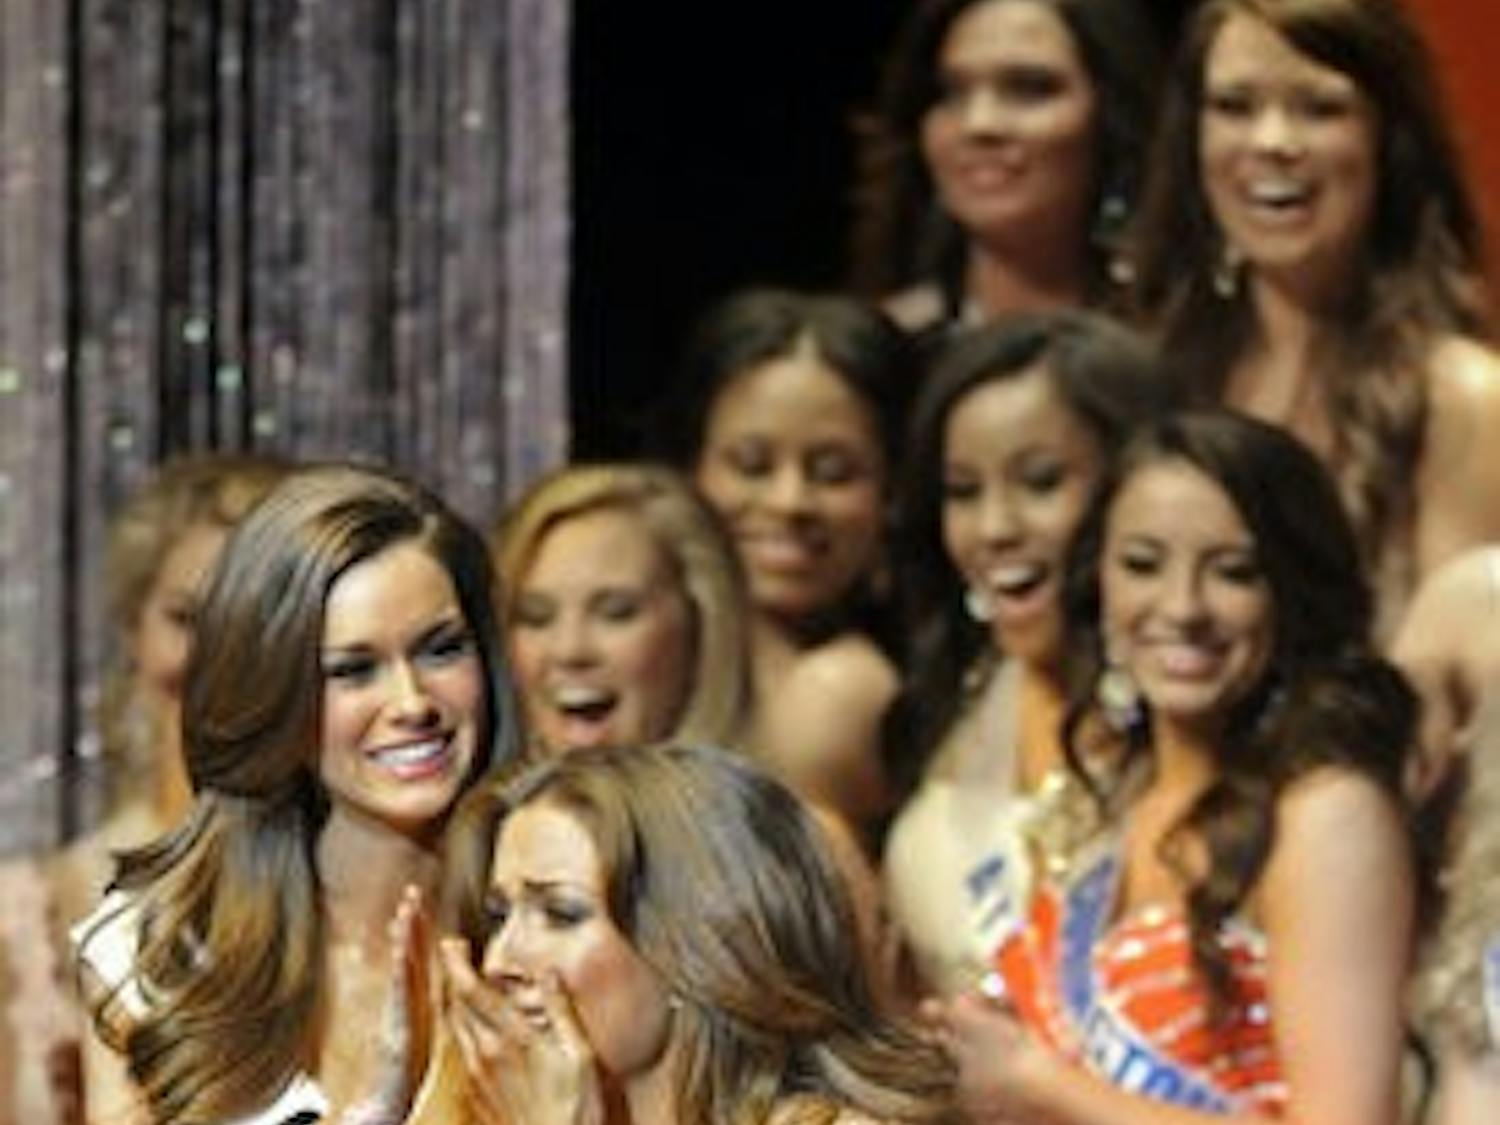 Katherine Webb of Columbus, Ga., reacts to being crowned Miss Alabama USA. "I just never in my wildest dreams ever thought it would actually come true," she said. (Courtesy of the Montgomery Advertiser)